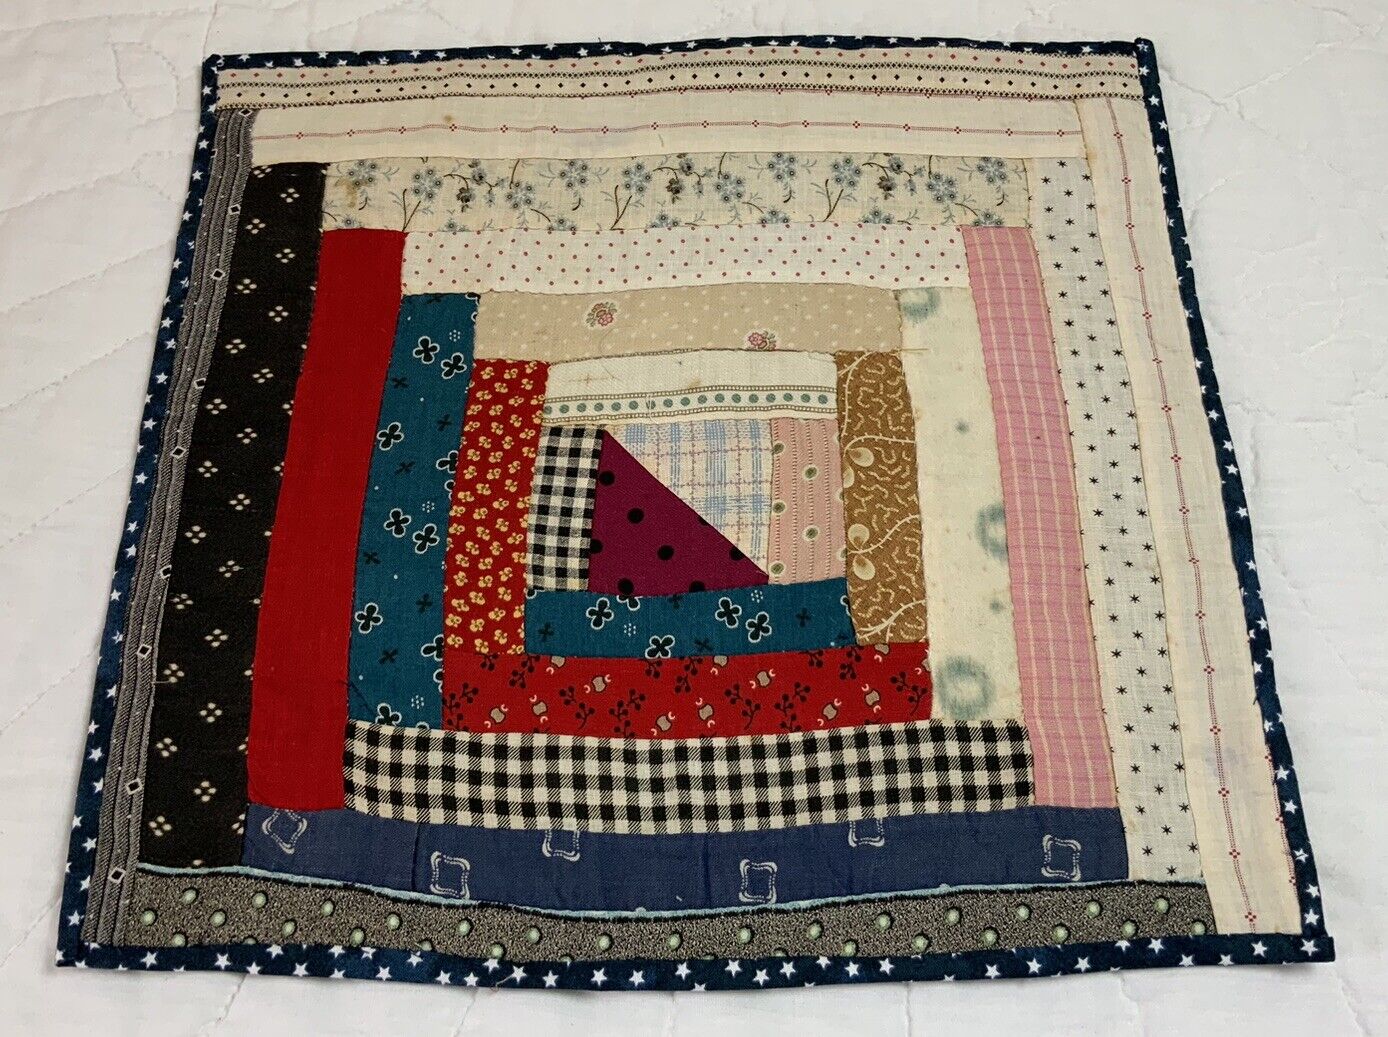 Vintage Patchwork Quilt Table Topper, Log Cabin, Early Calico Prints, Florals